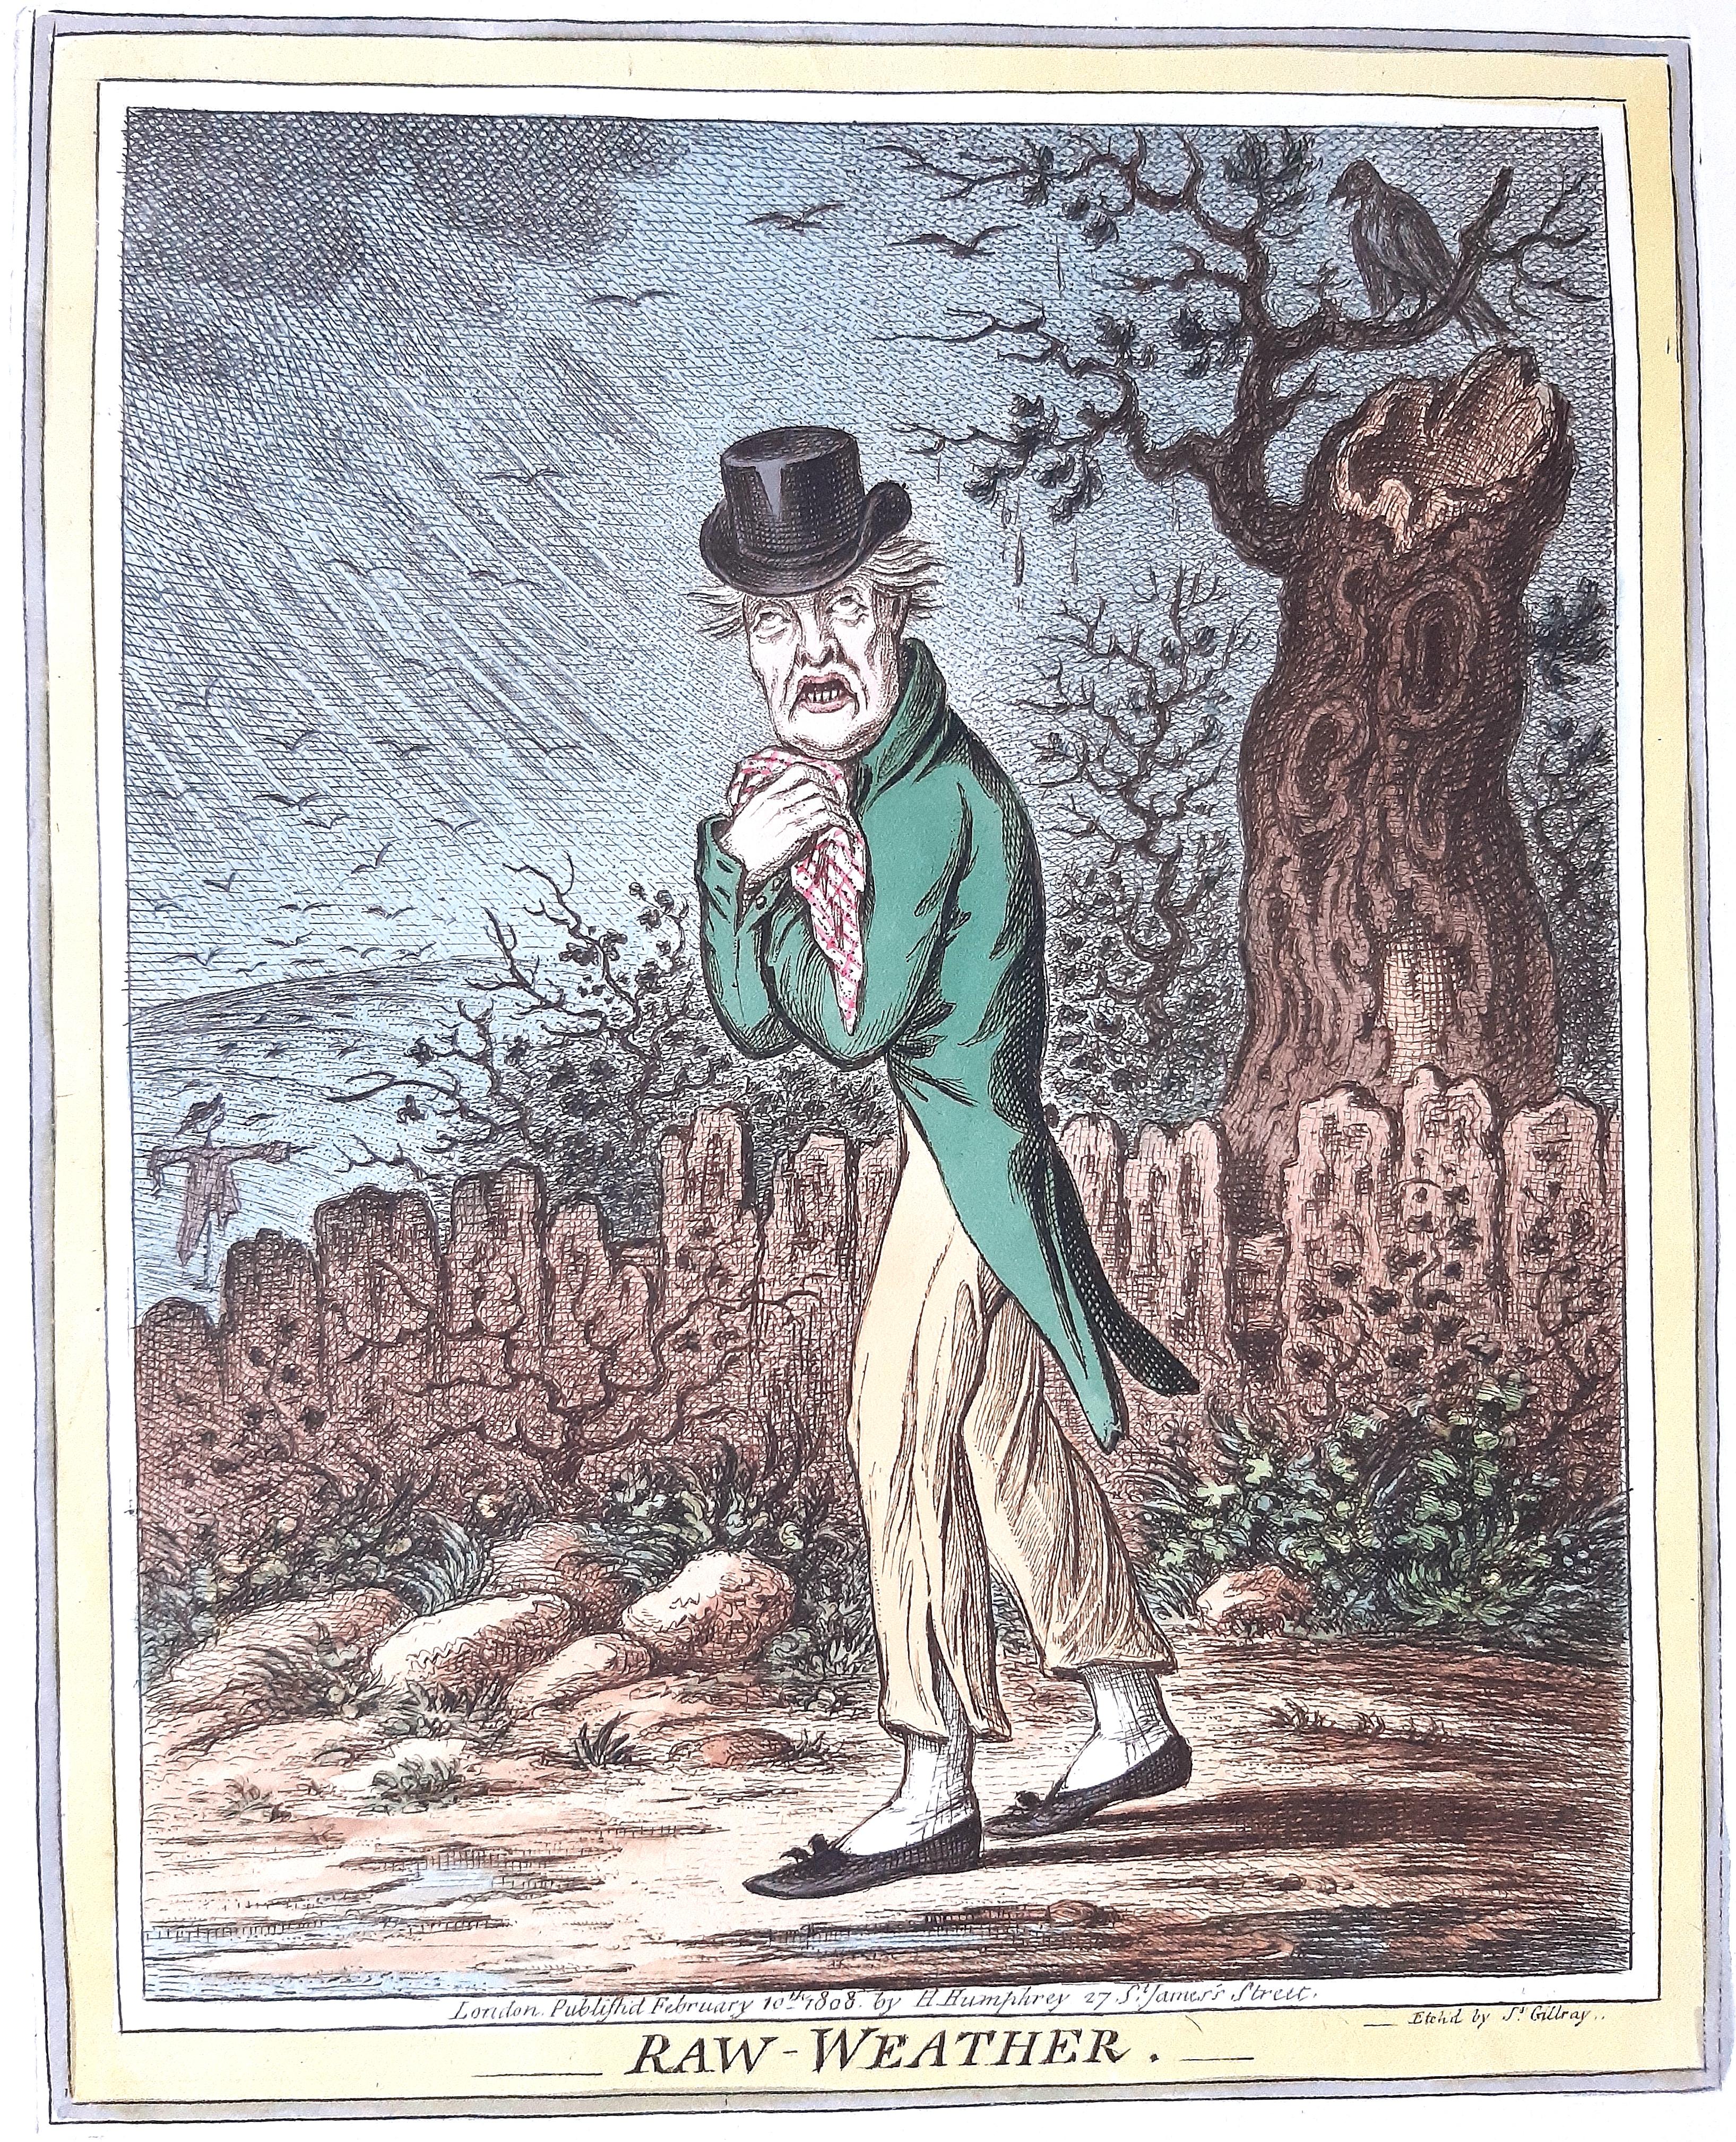 Delicious Weather - Complete Series of 5 Hand-colored Etchings - 1808 3